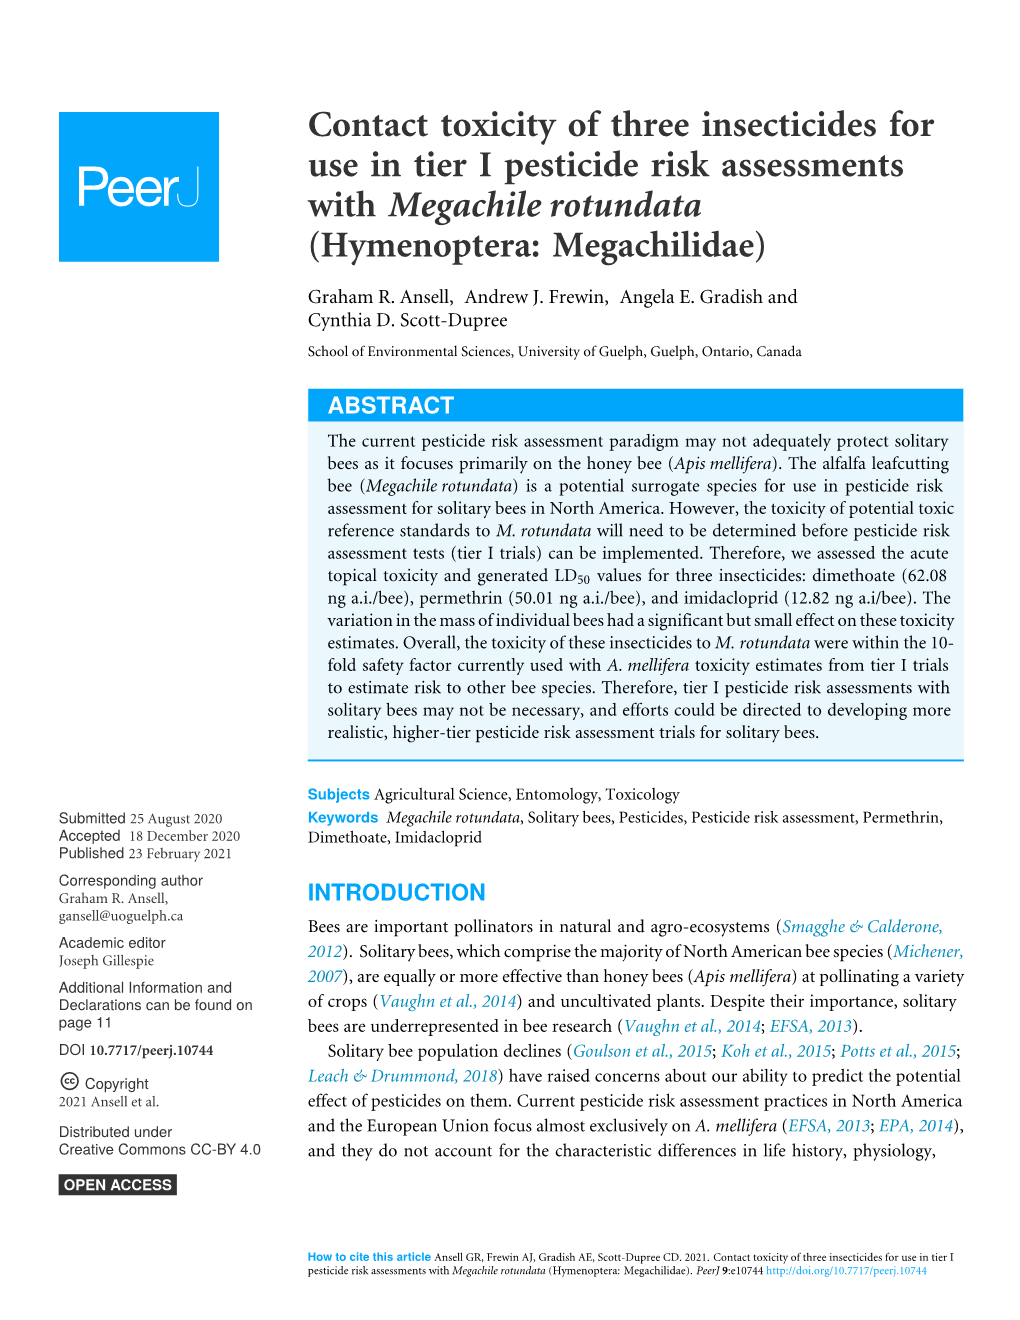 Contact Toxicity of Three Insecticides for Use in Tier I Pesticide Risk Assessments with Megachile Rotundata (Hymenoptera: Megachilidae)